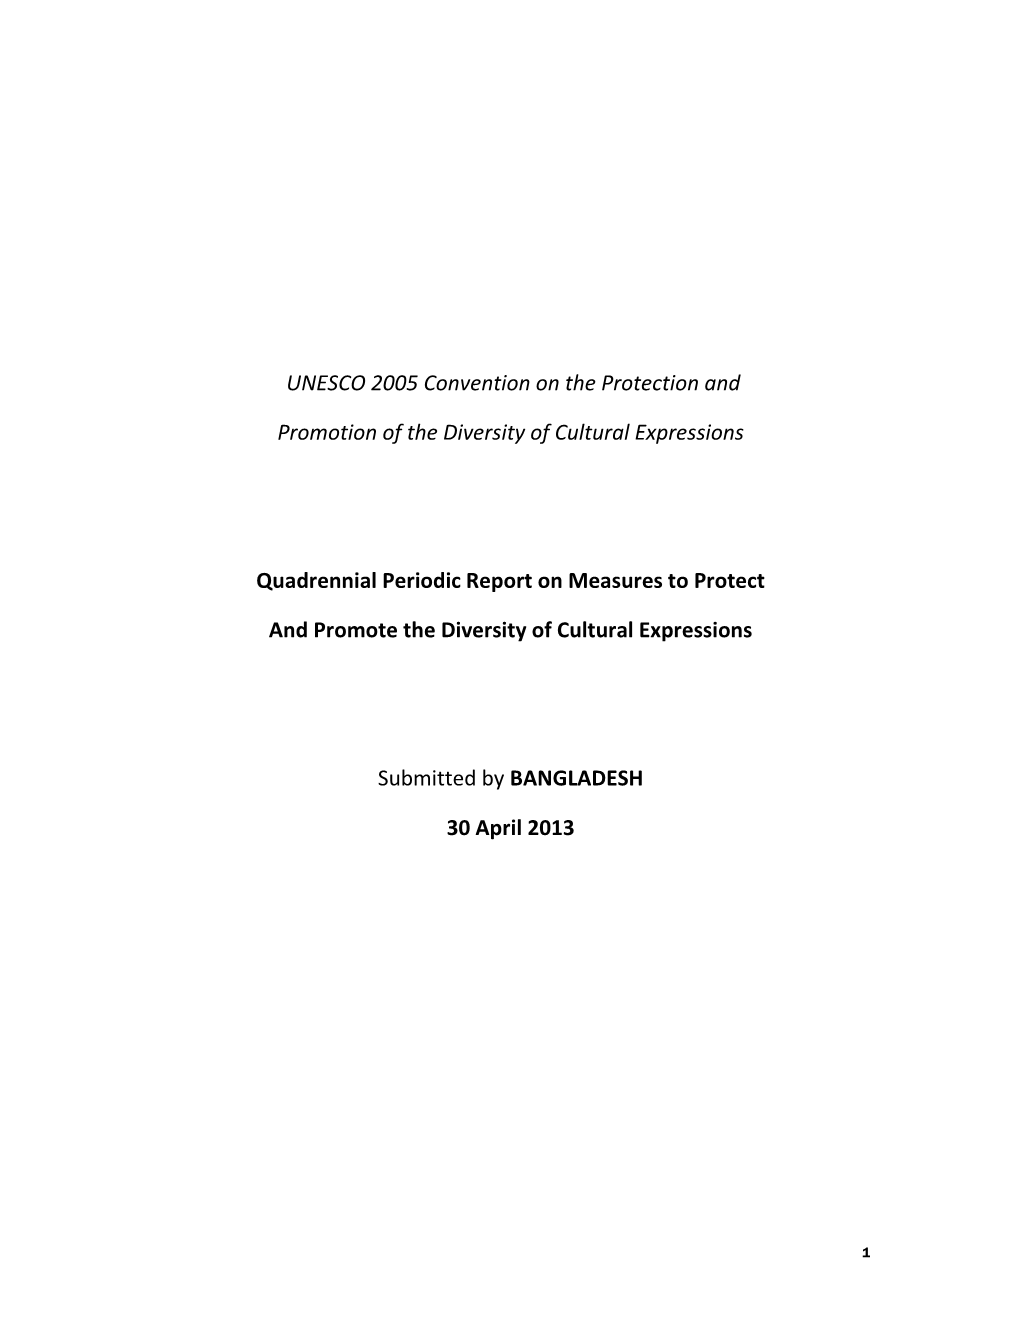 UNESCO 2005 Convention on the Protection and Promotion of The